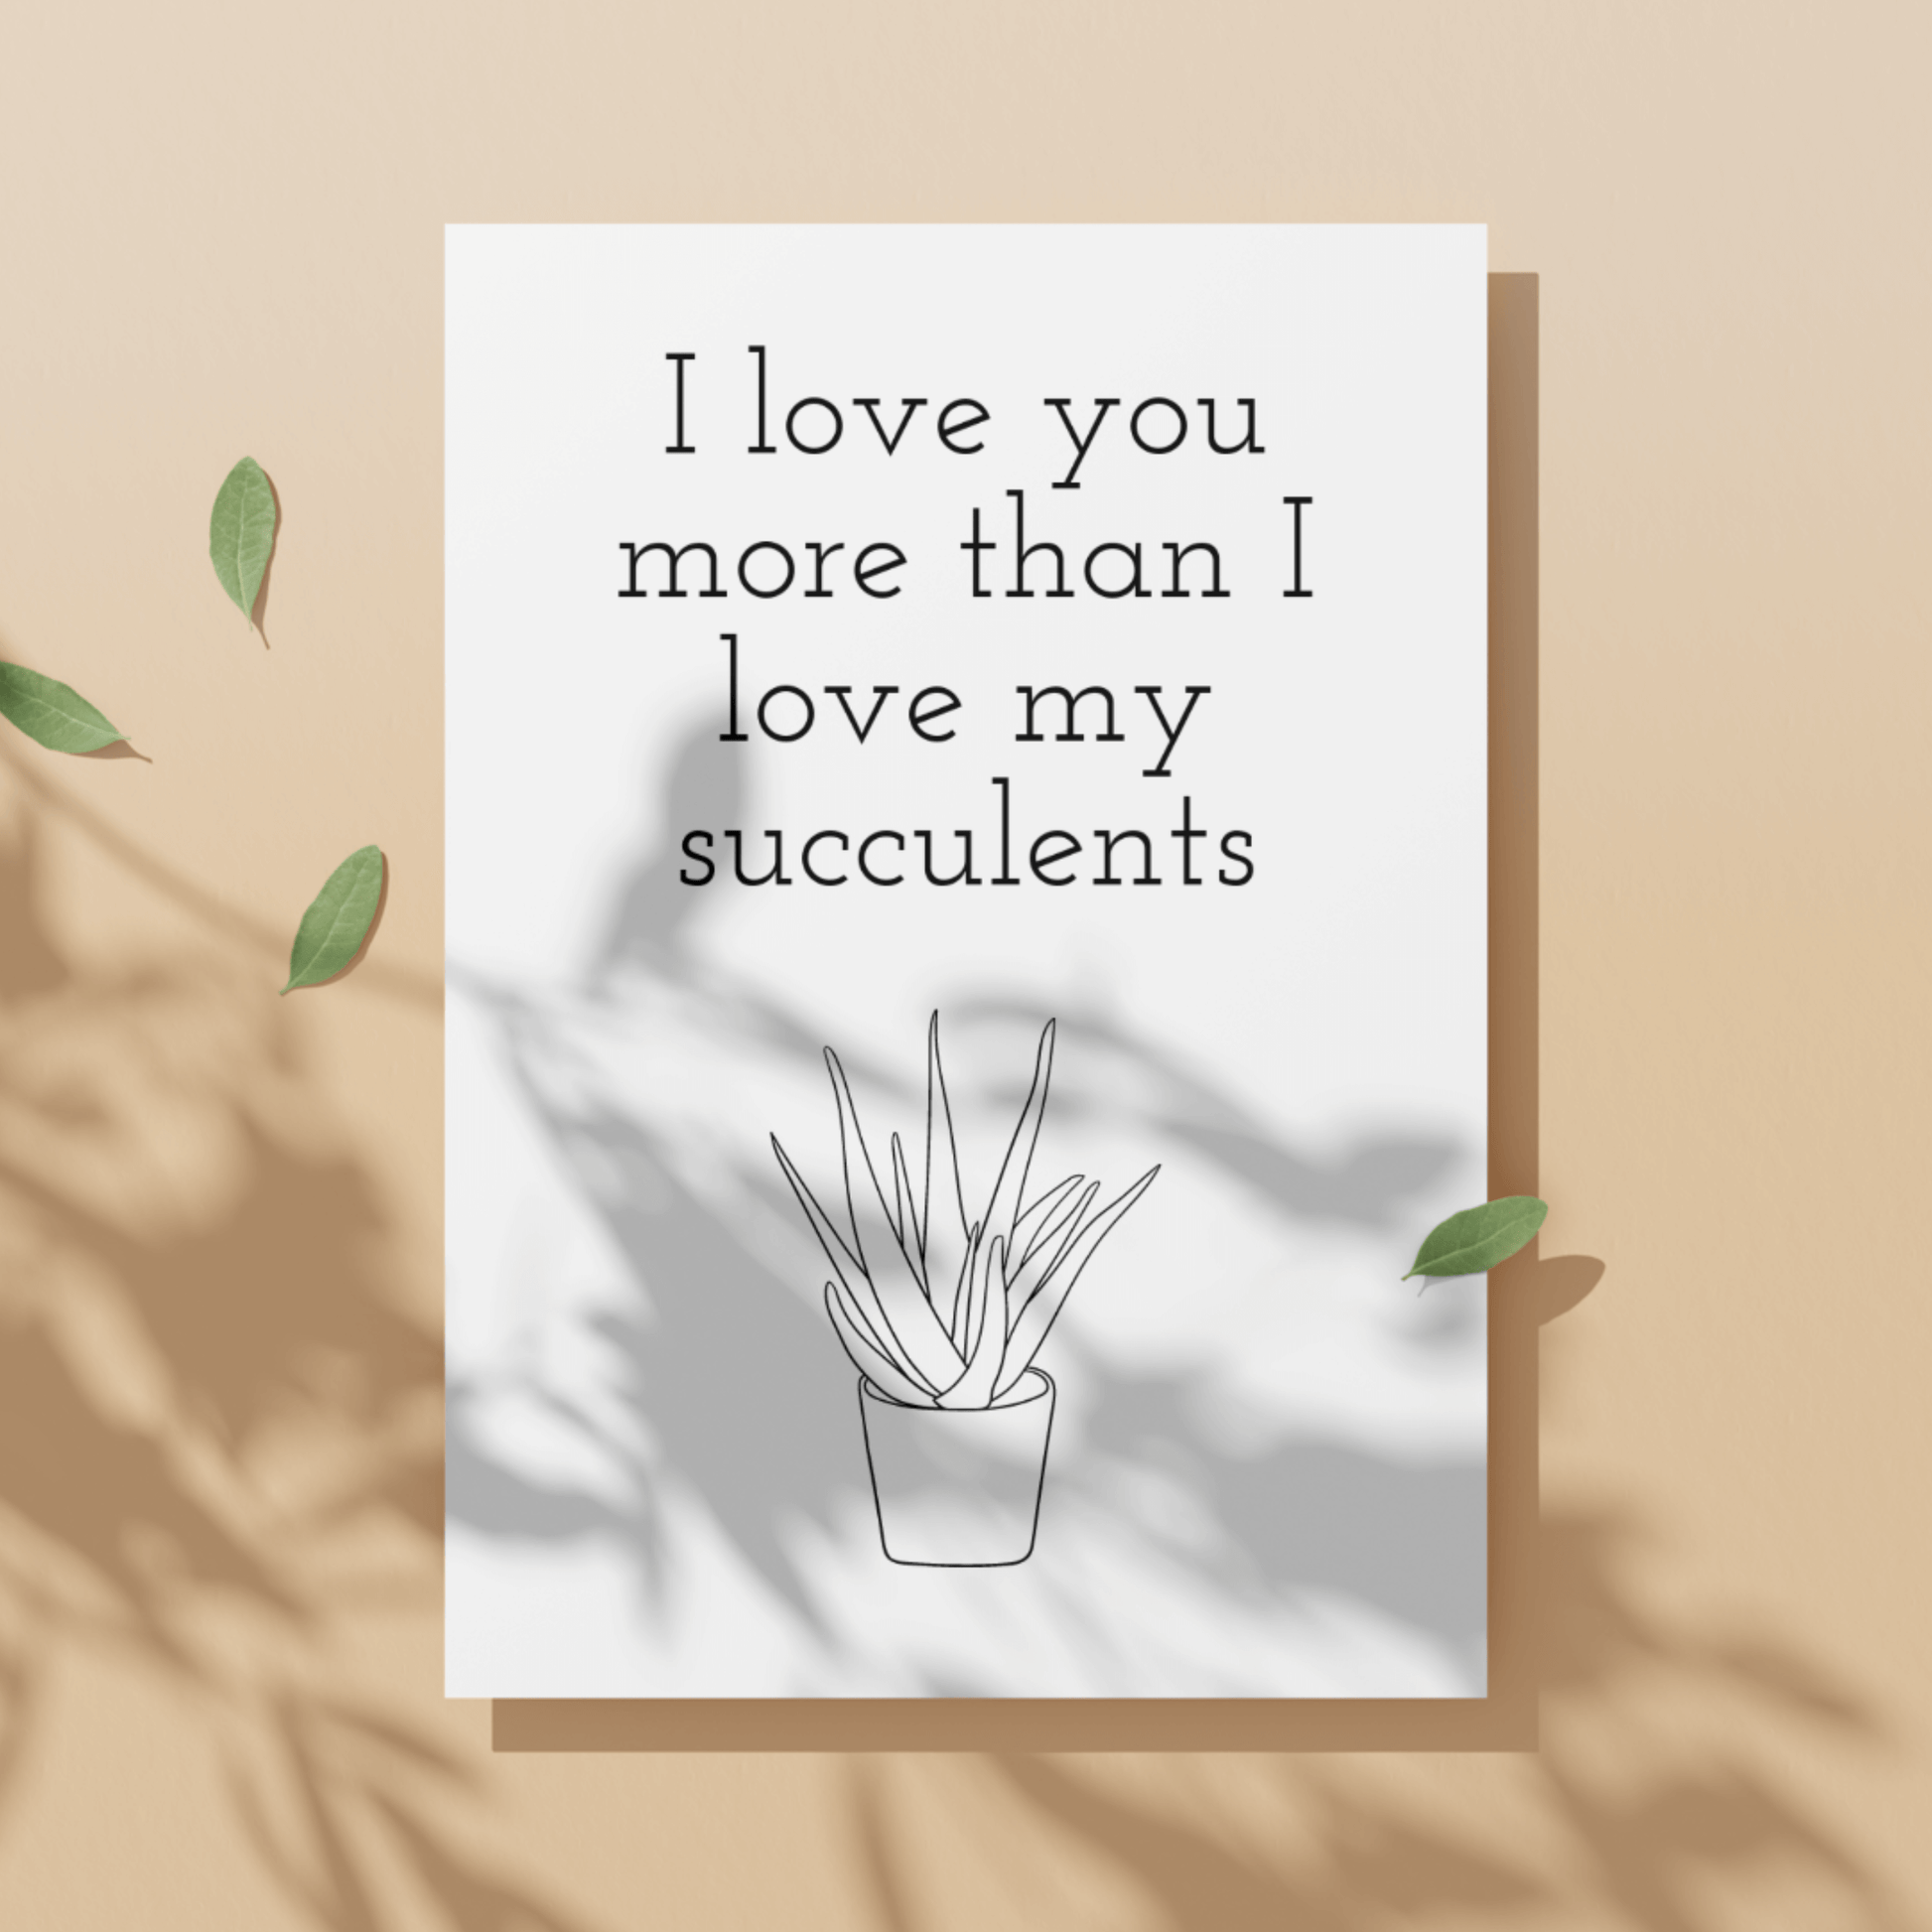 Little Kraken's I Love You More Than My Succulents | Funny Love Anniversary Card | Funny Aloe Vera Love Card, Love Cards for £3.50 each